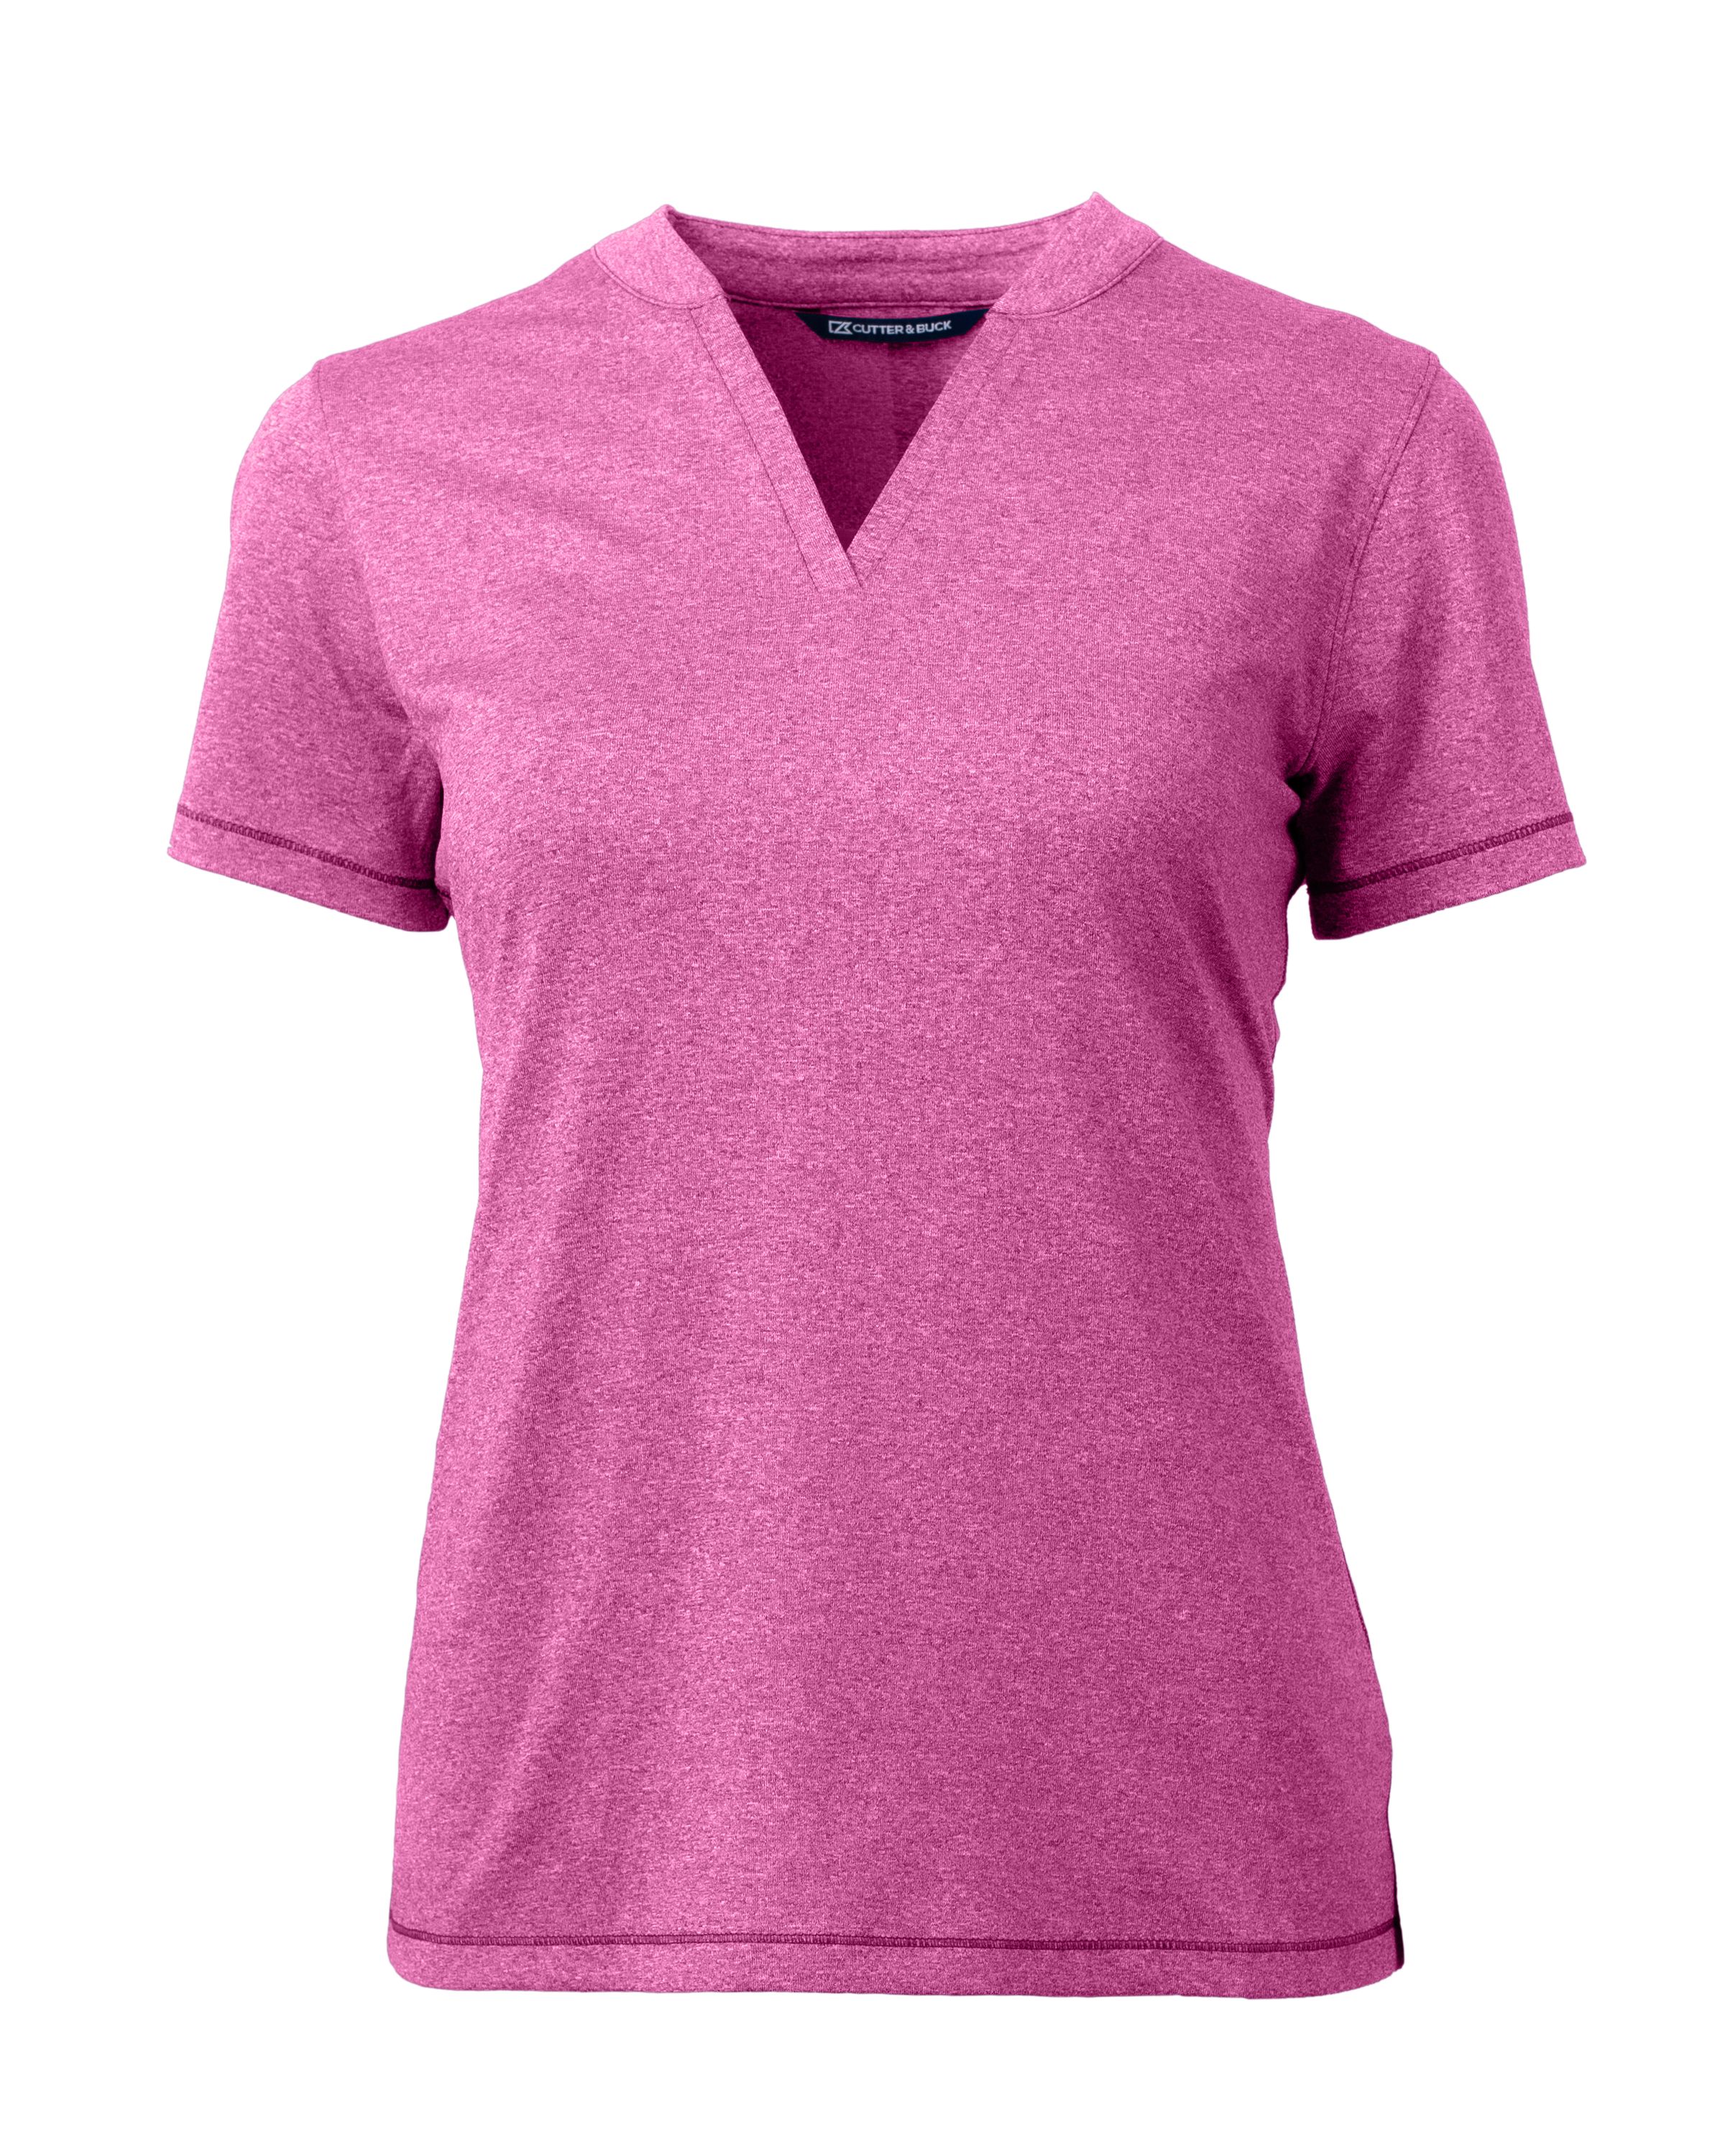 CB Forge Heathered Stretch Womens Blade Top-